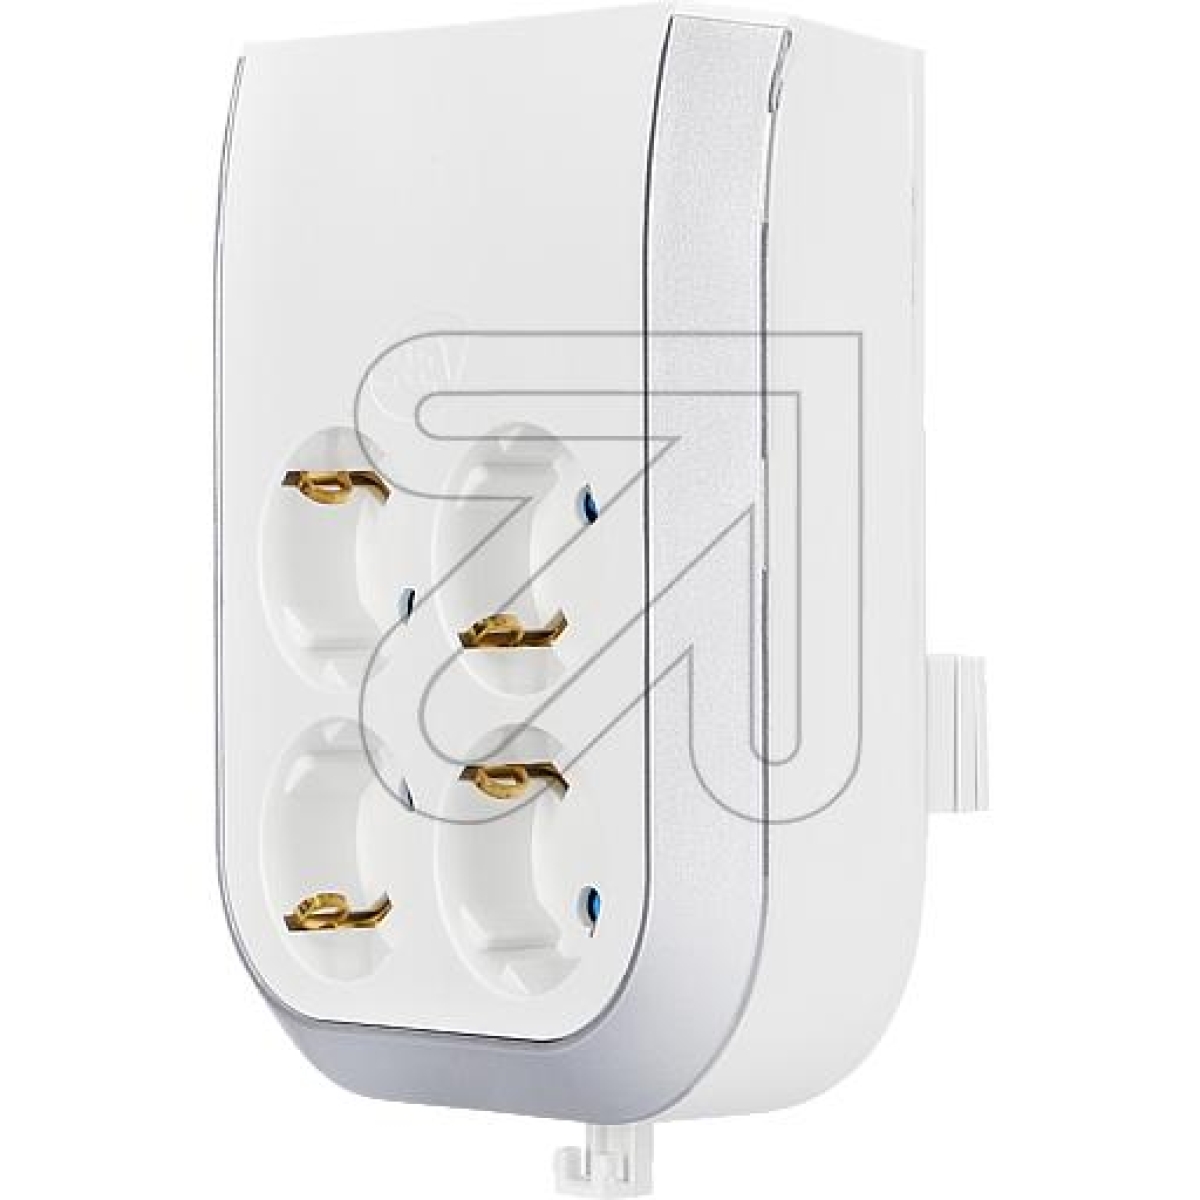 REV RITTER GMBHMultiPower socket extension 4-way white 0020340112Article-No: 061610